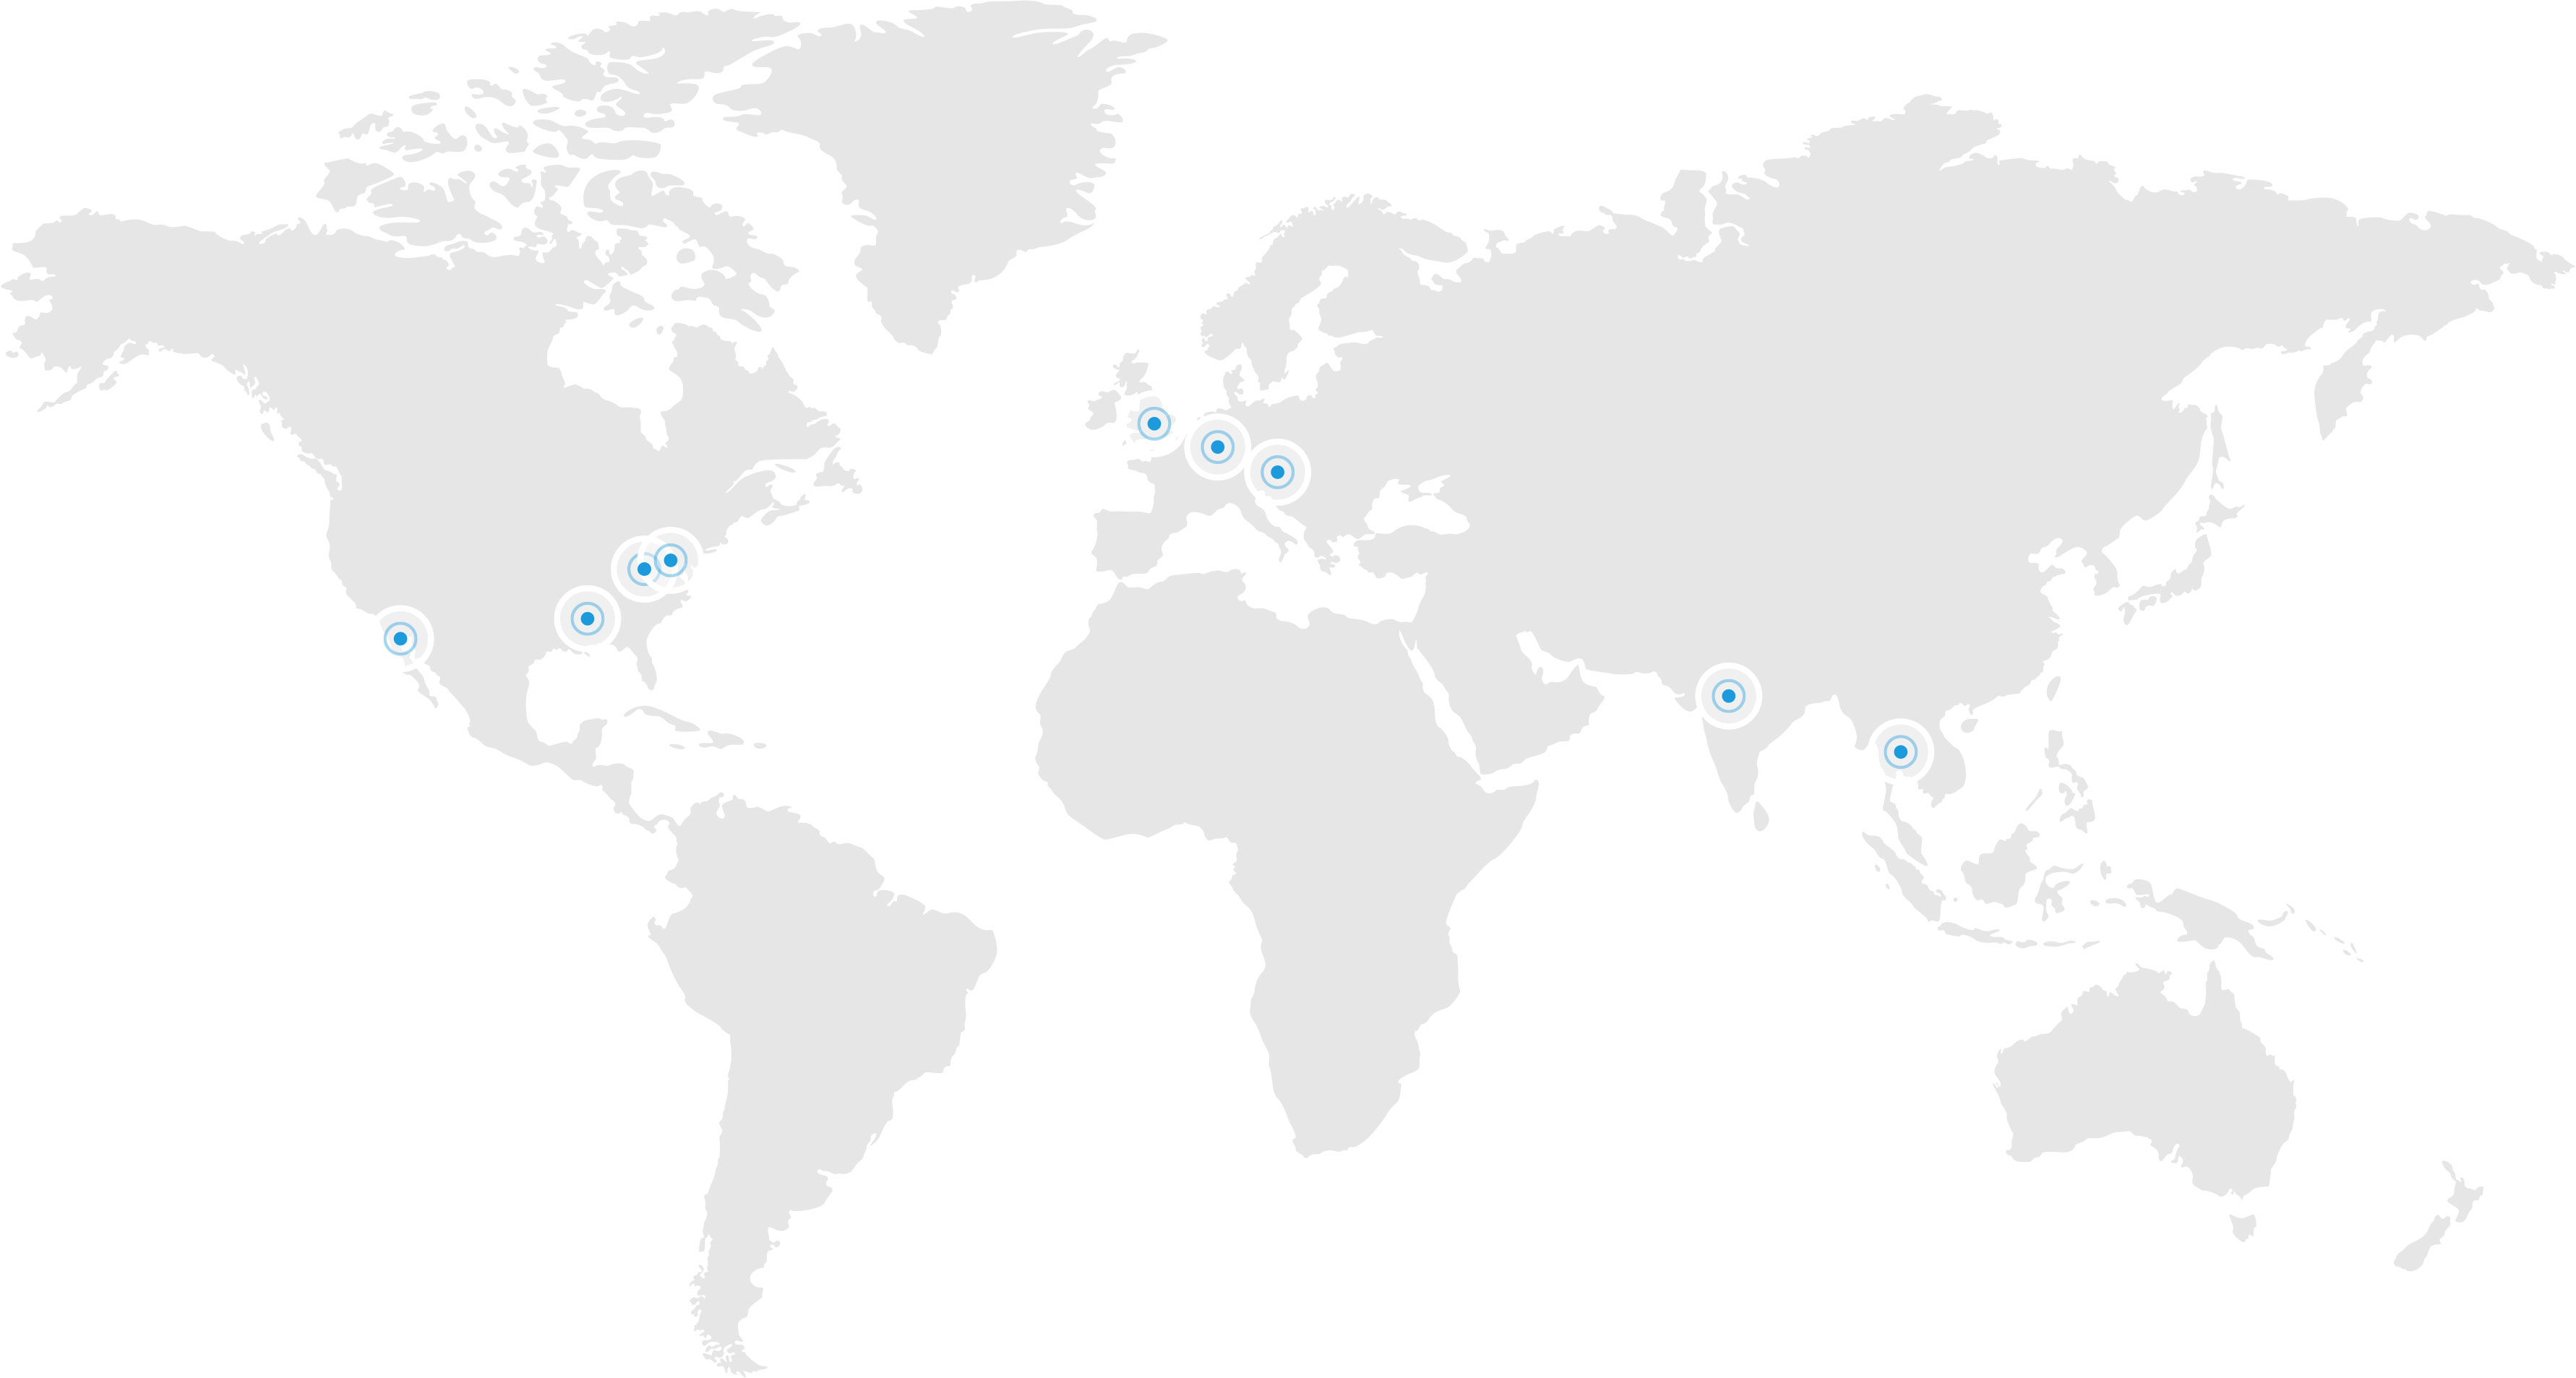 Brentwood worldwide facilities locations